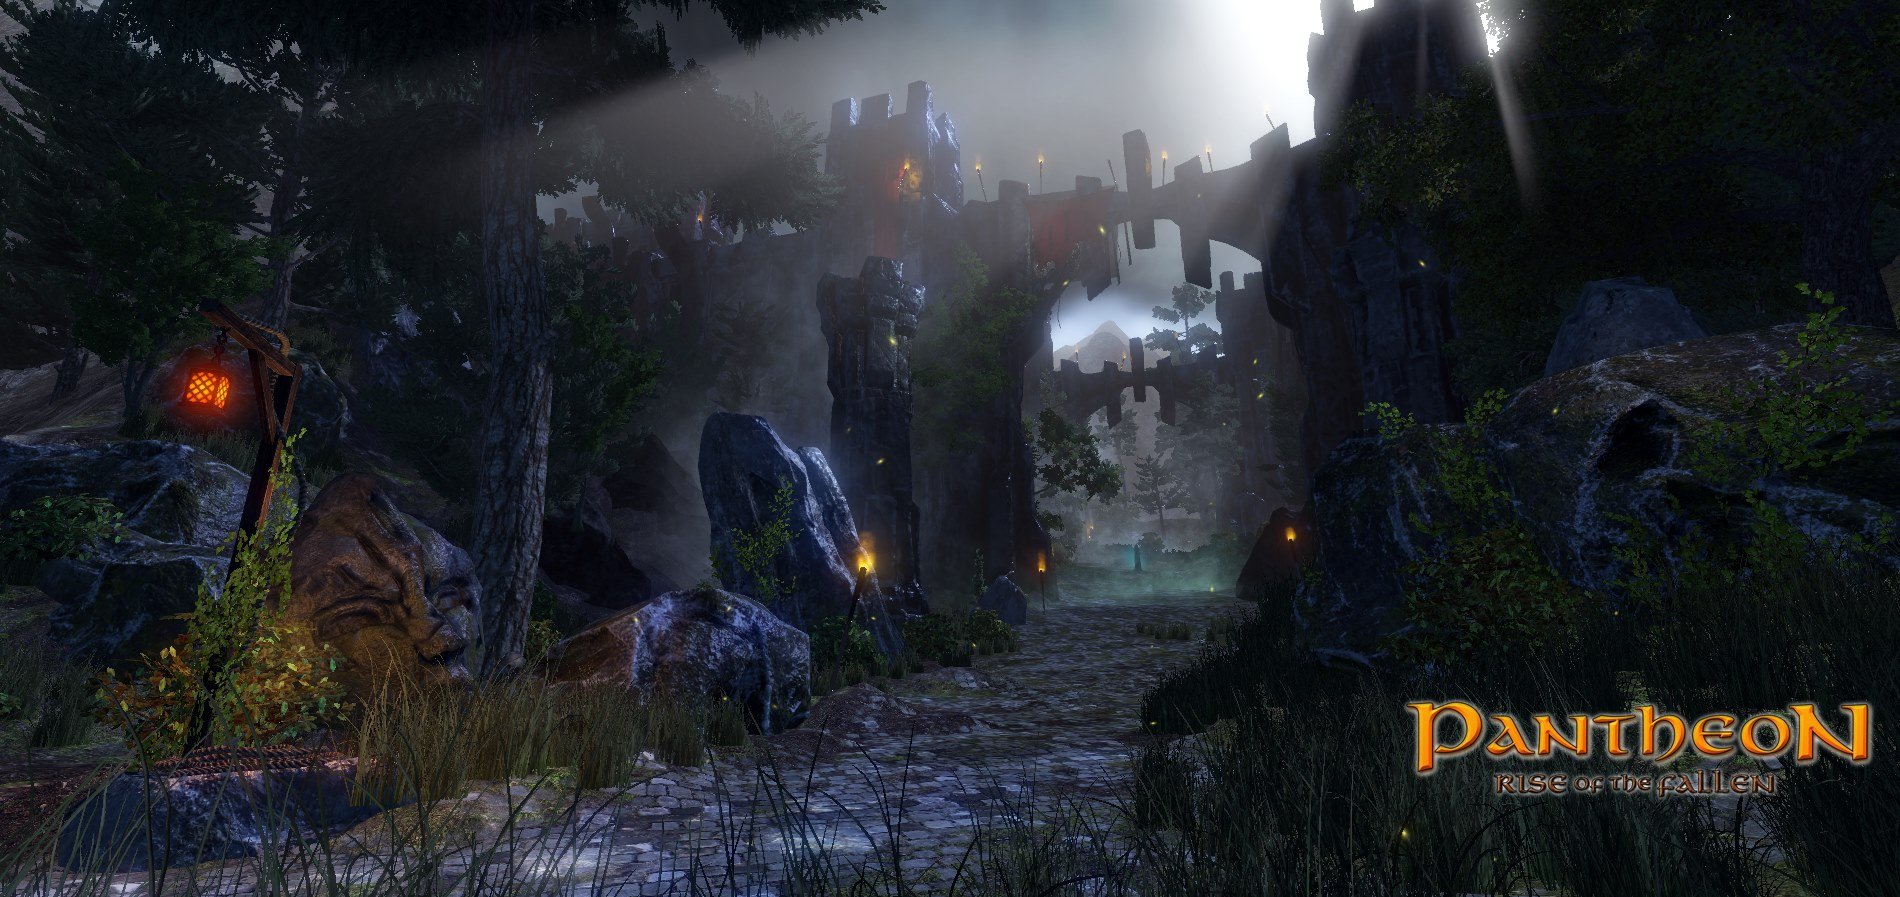 2015-May 4: John Diasparra uses J.P. Targete's paint-over concept art as a reference to finalize the scene in-game. Avendyr's Pass during day/night cycle.